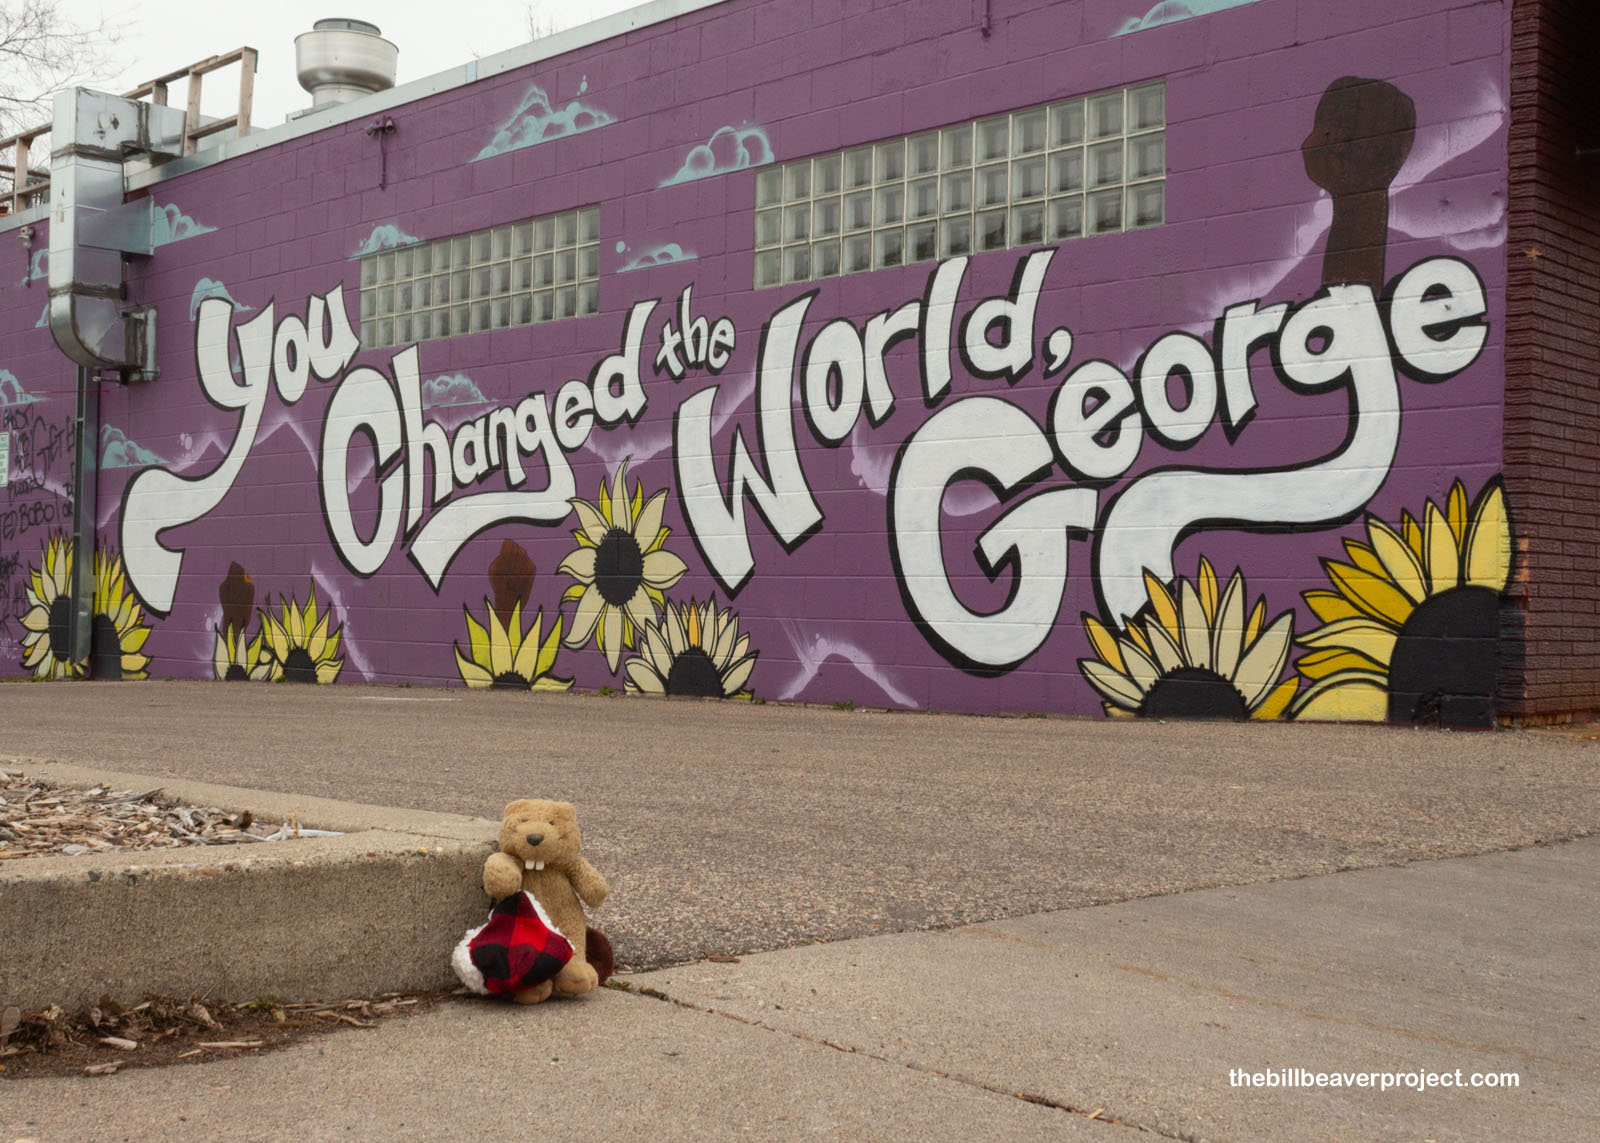 One of the many murals in memory of George Floyd!